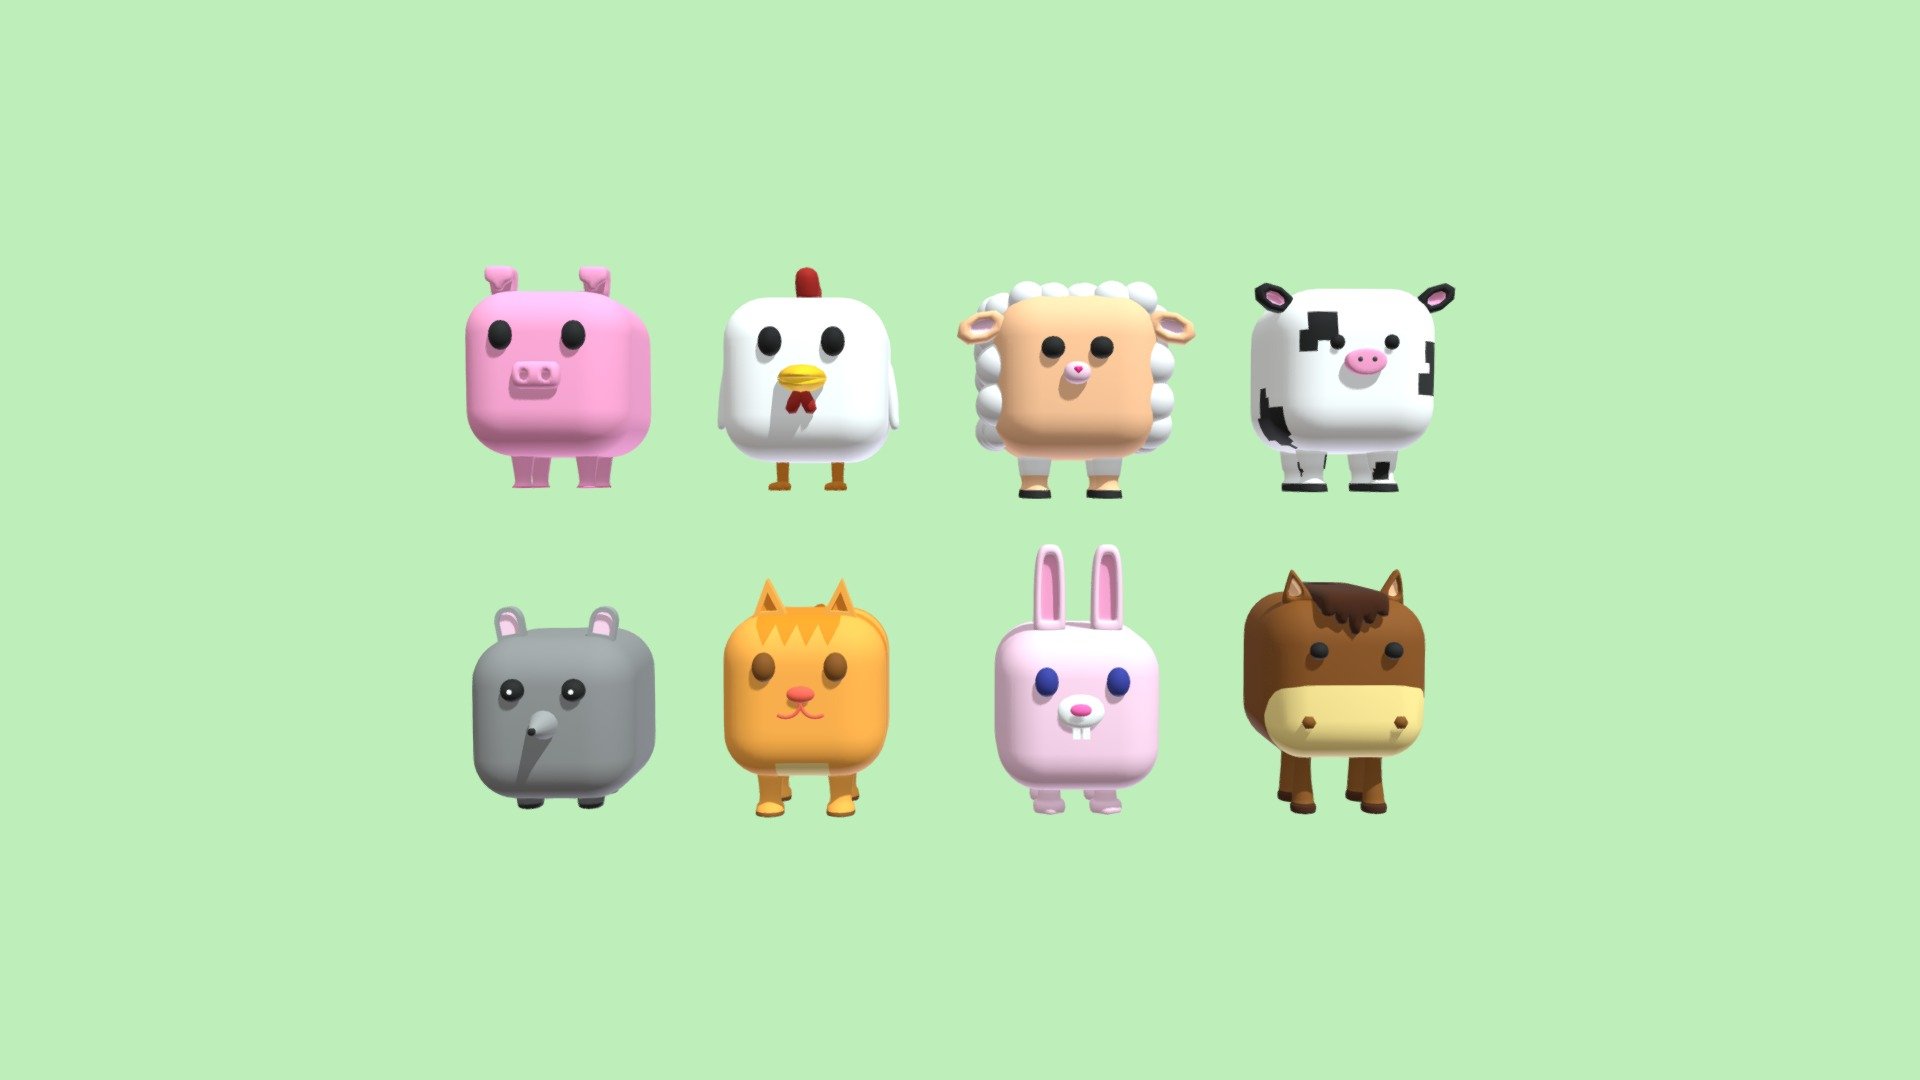 Hello! Cube Animals designed with Blender version 3.2.1. It can be used in games. You can create your own farm. From the left side; ;Pig, Chicken, Sheep, Cow, Mouse, Cat, Rabbit, Horse 3d model